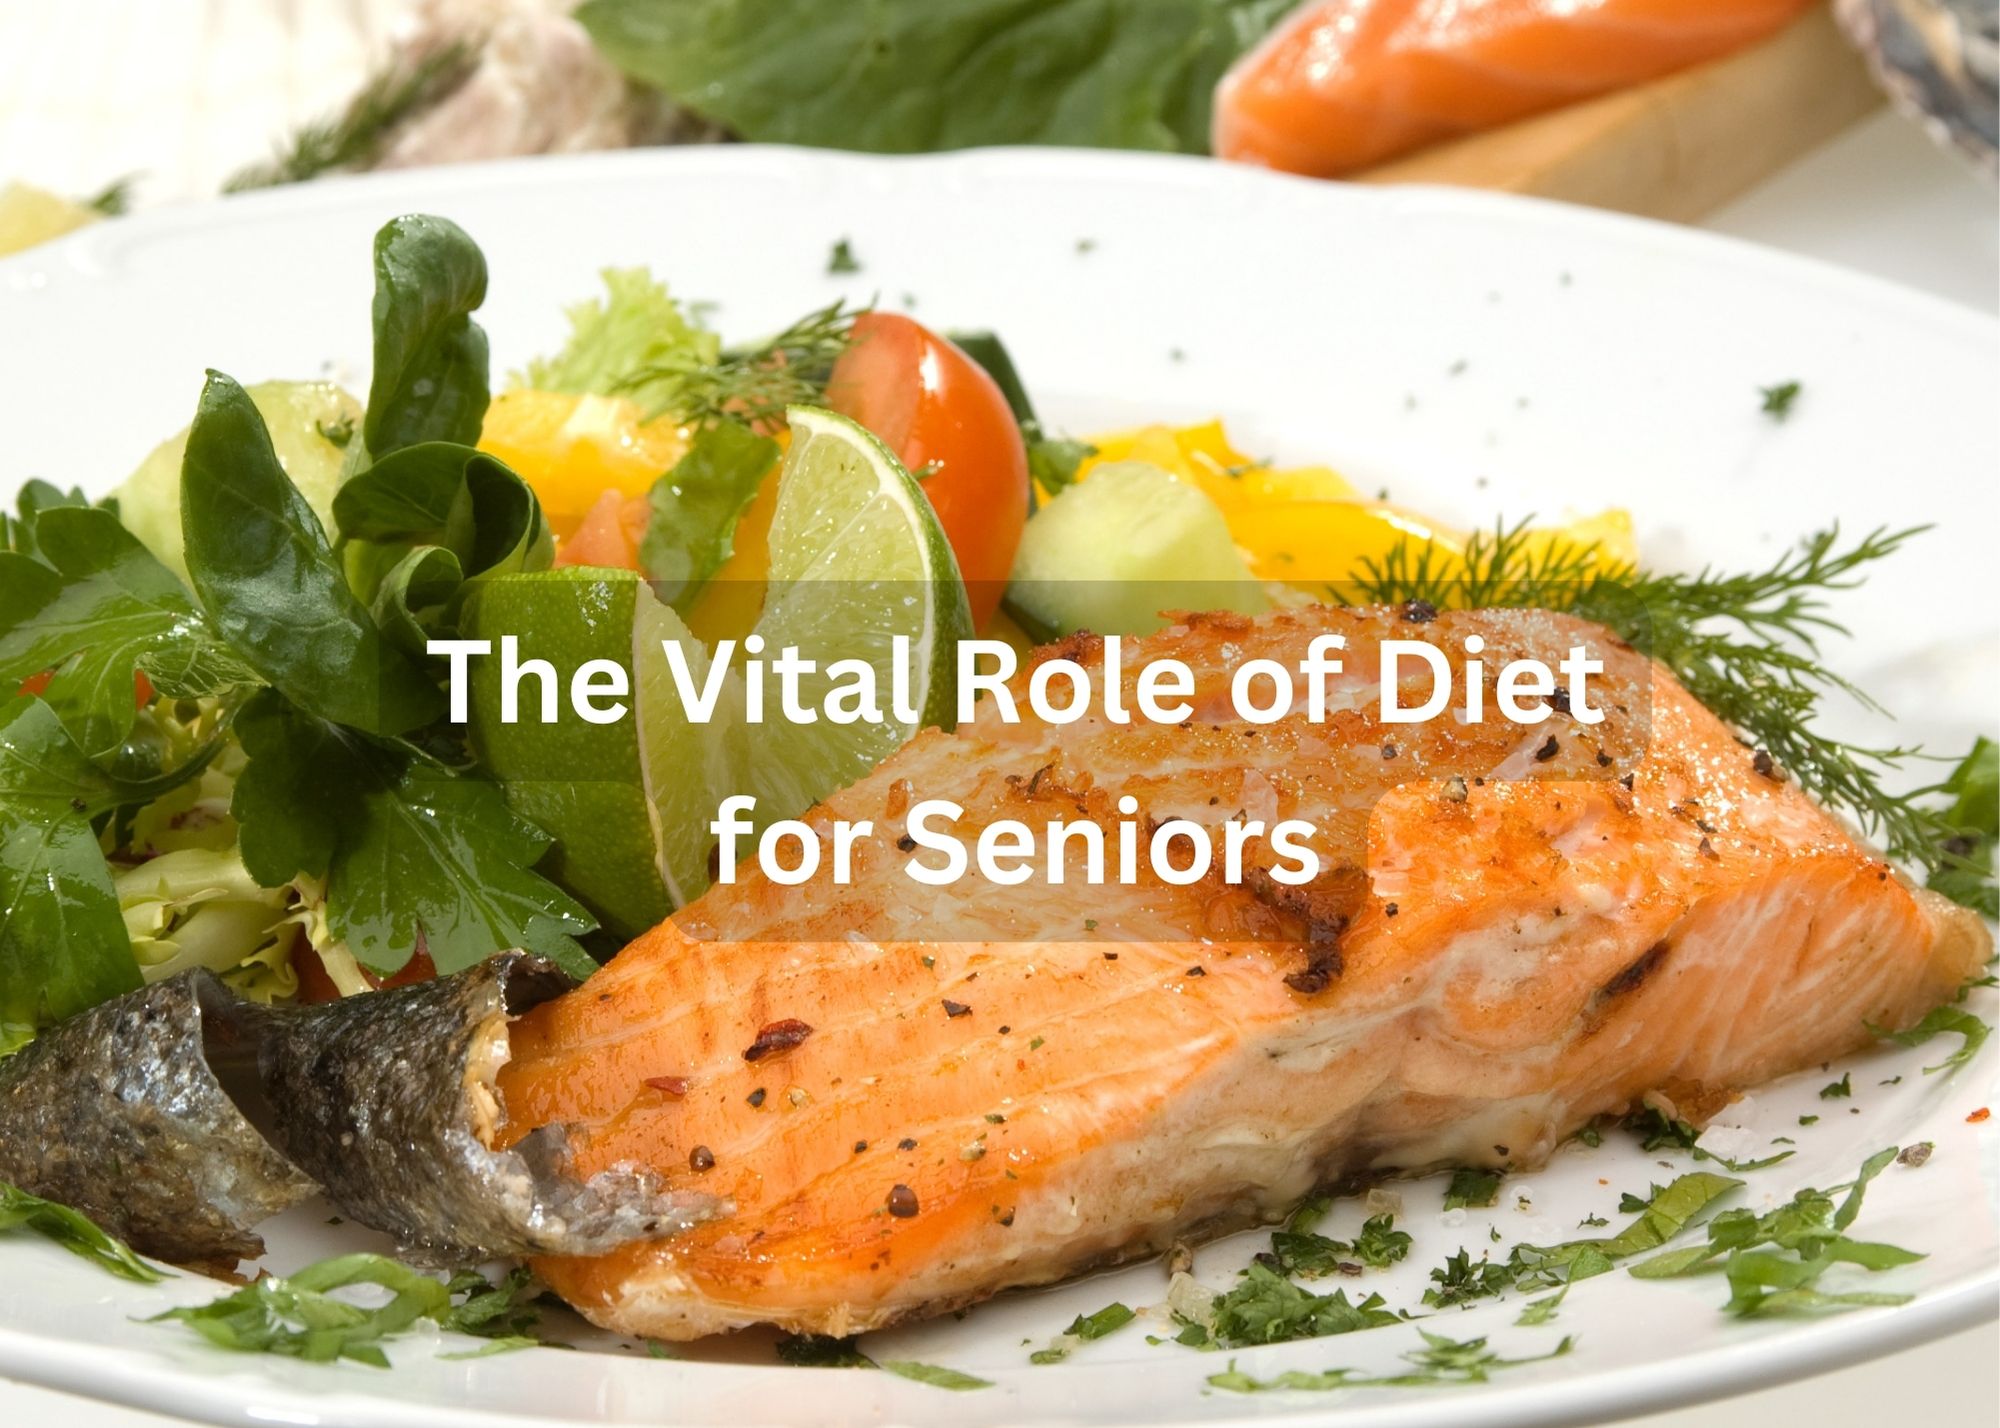 The Vital Role of Diet for Aging Seniors especially those with memory disorders